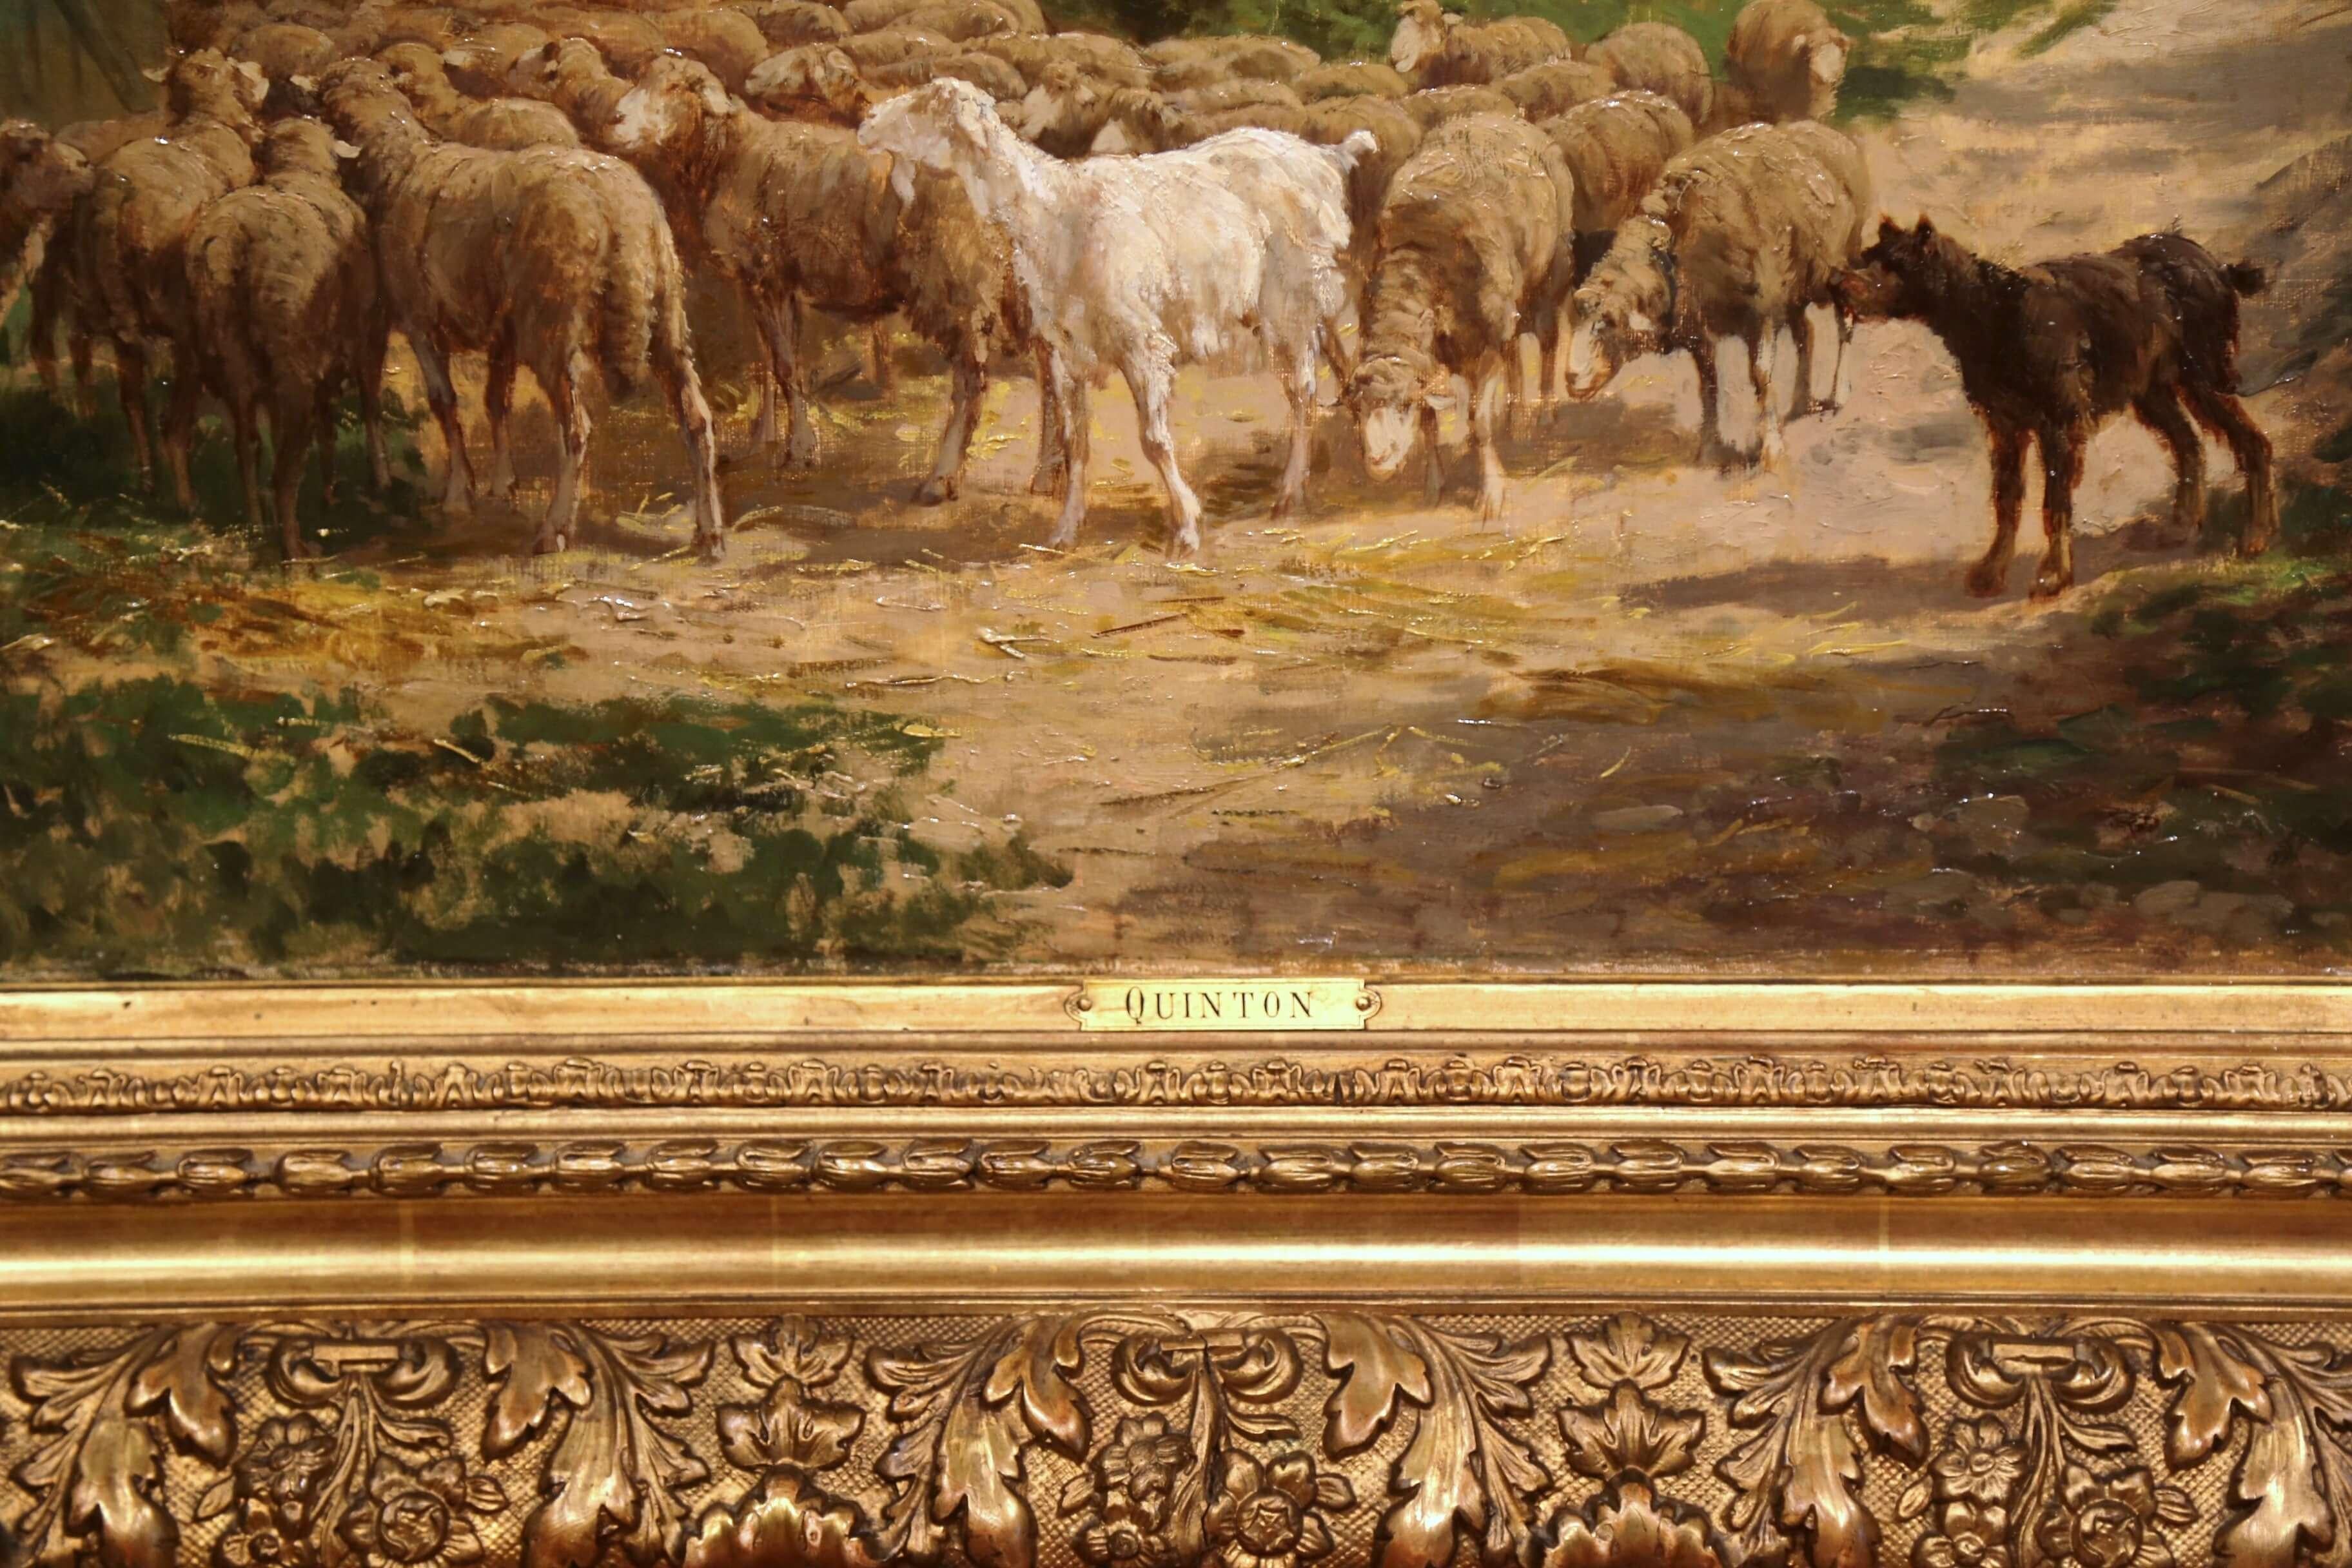 Pair of 19th Century French Sheep Oil Paintings in Gilt Frames Signed C. Quinton 2